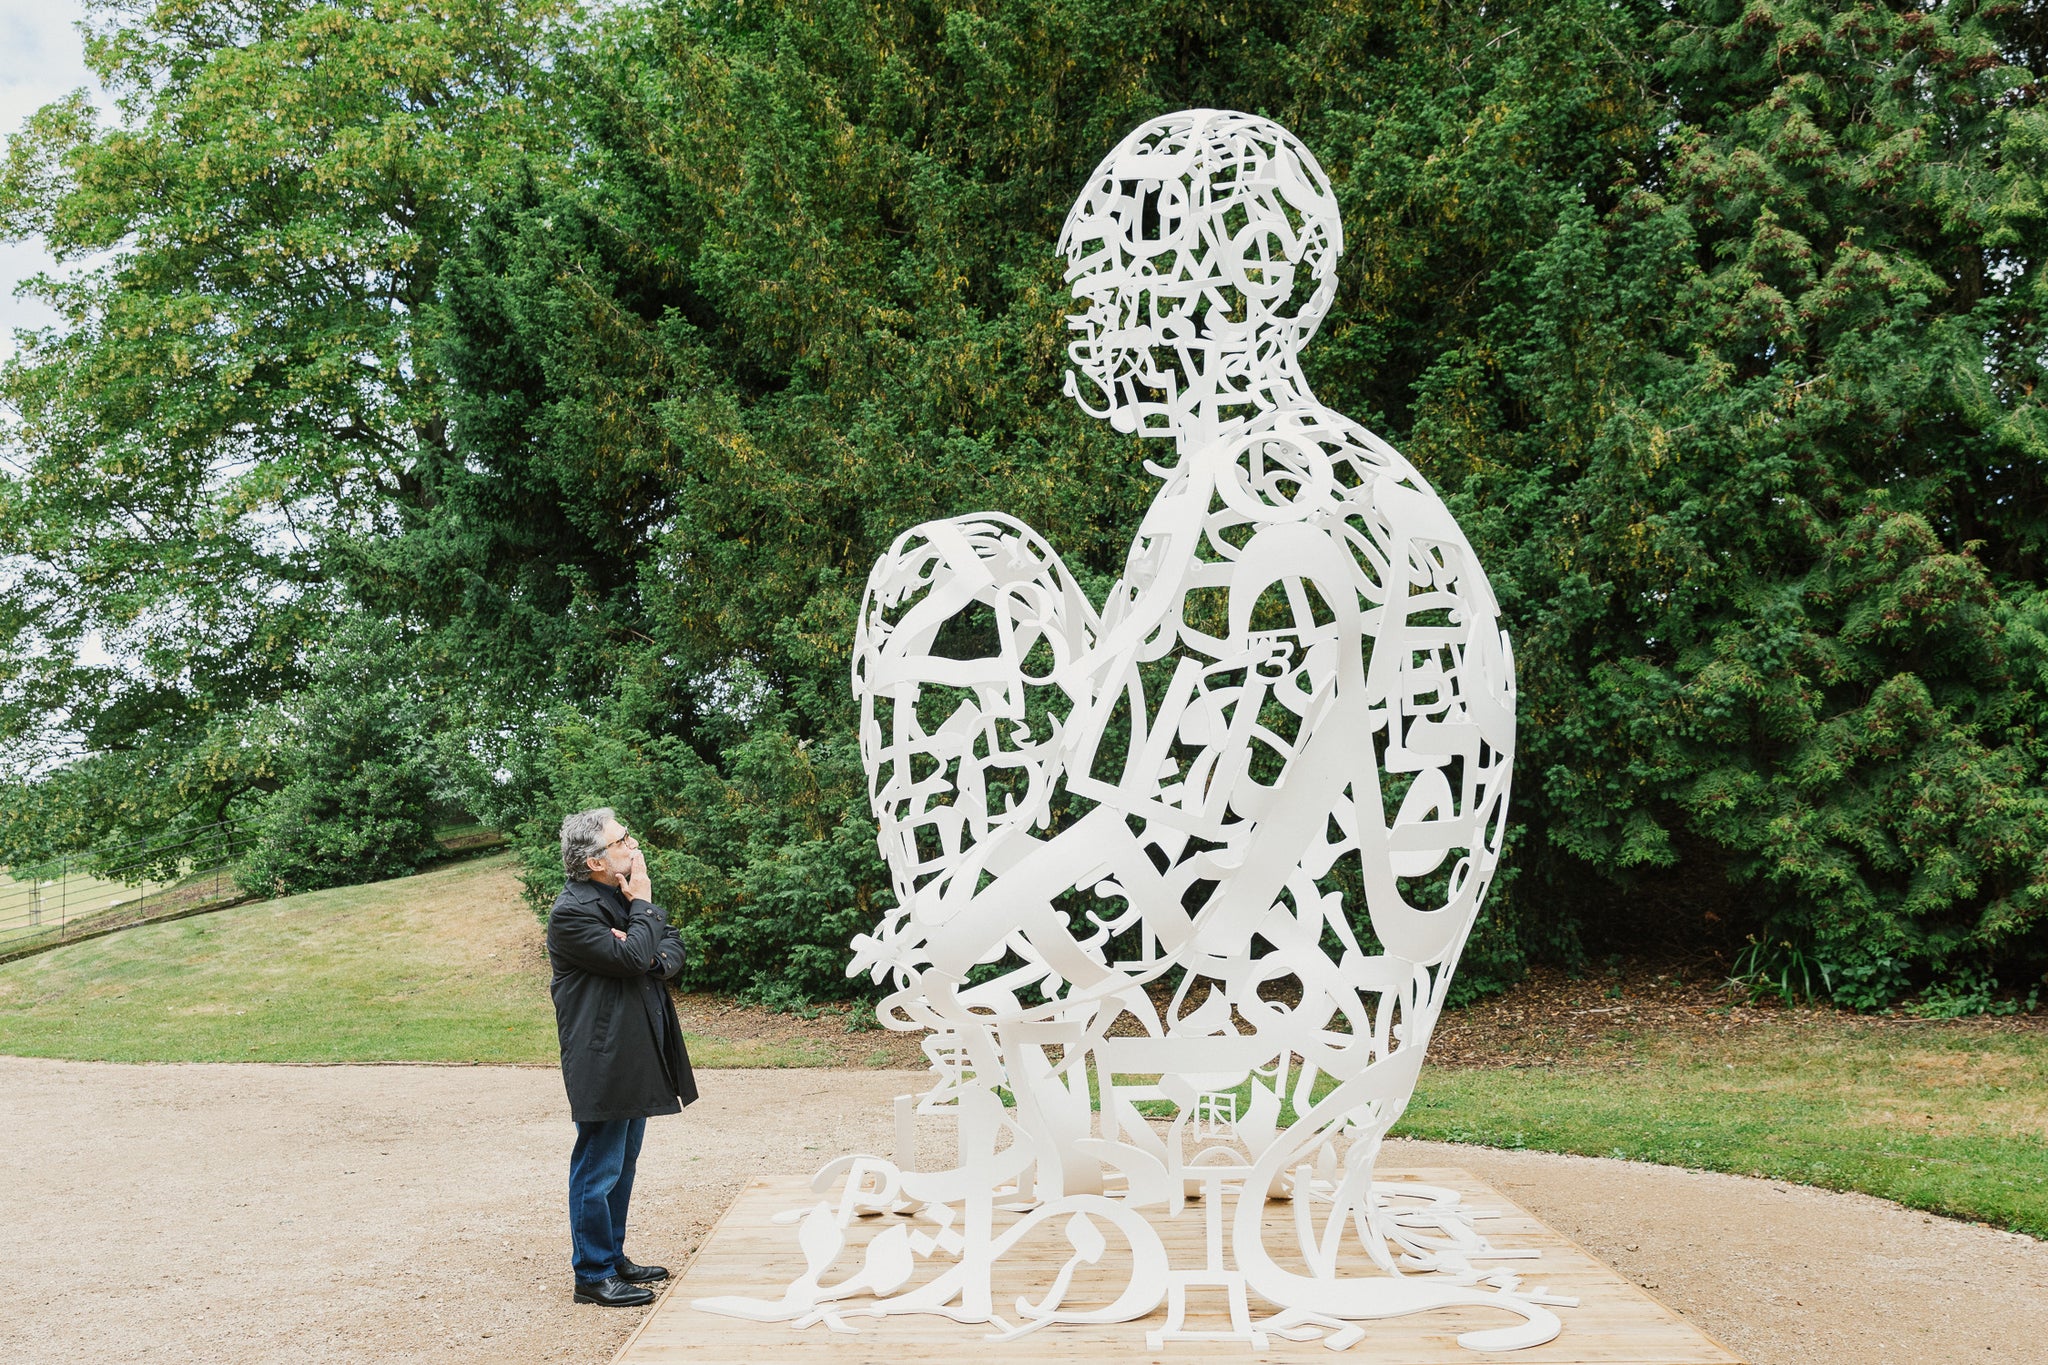 A large sculpture in Yorkshire Sculpture Park constructed out of a myriad of letters from different world languages.